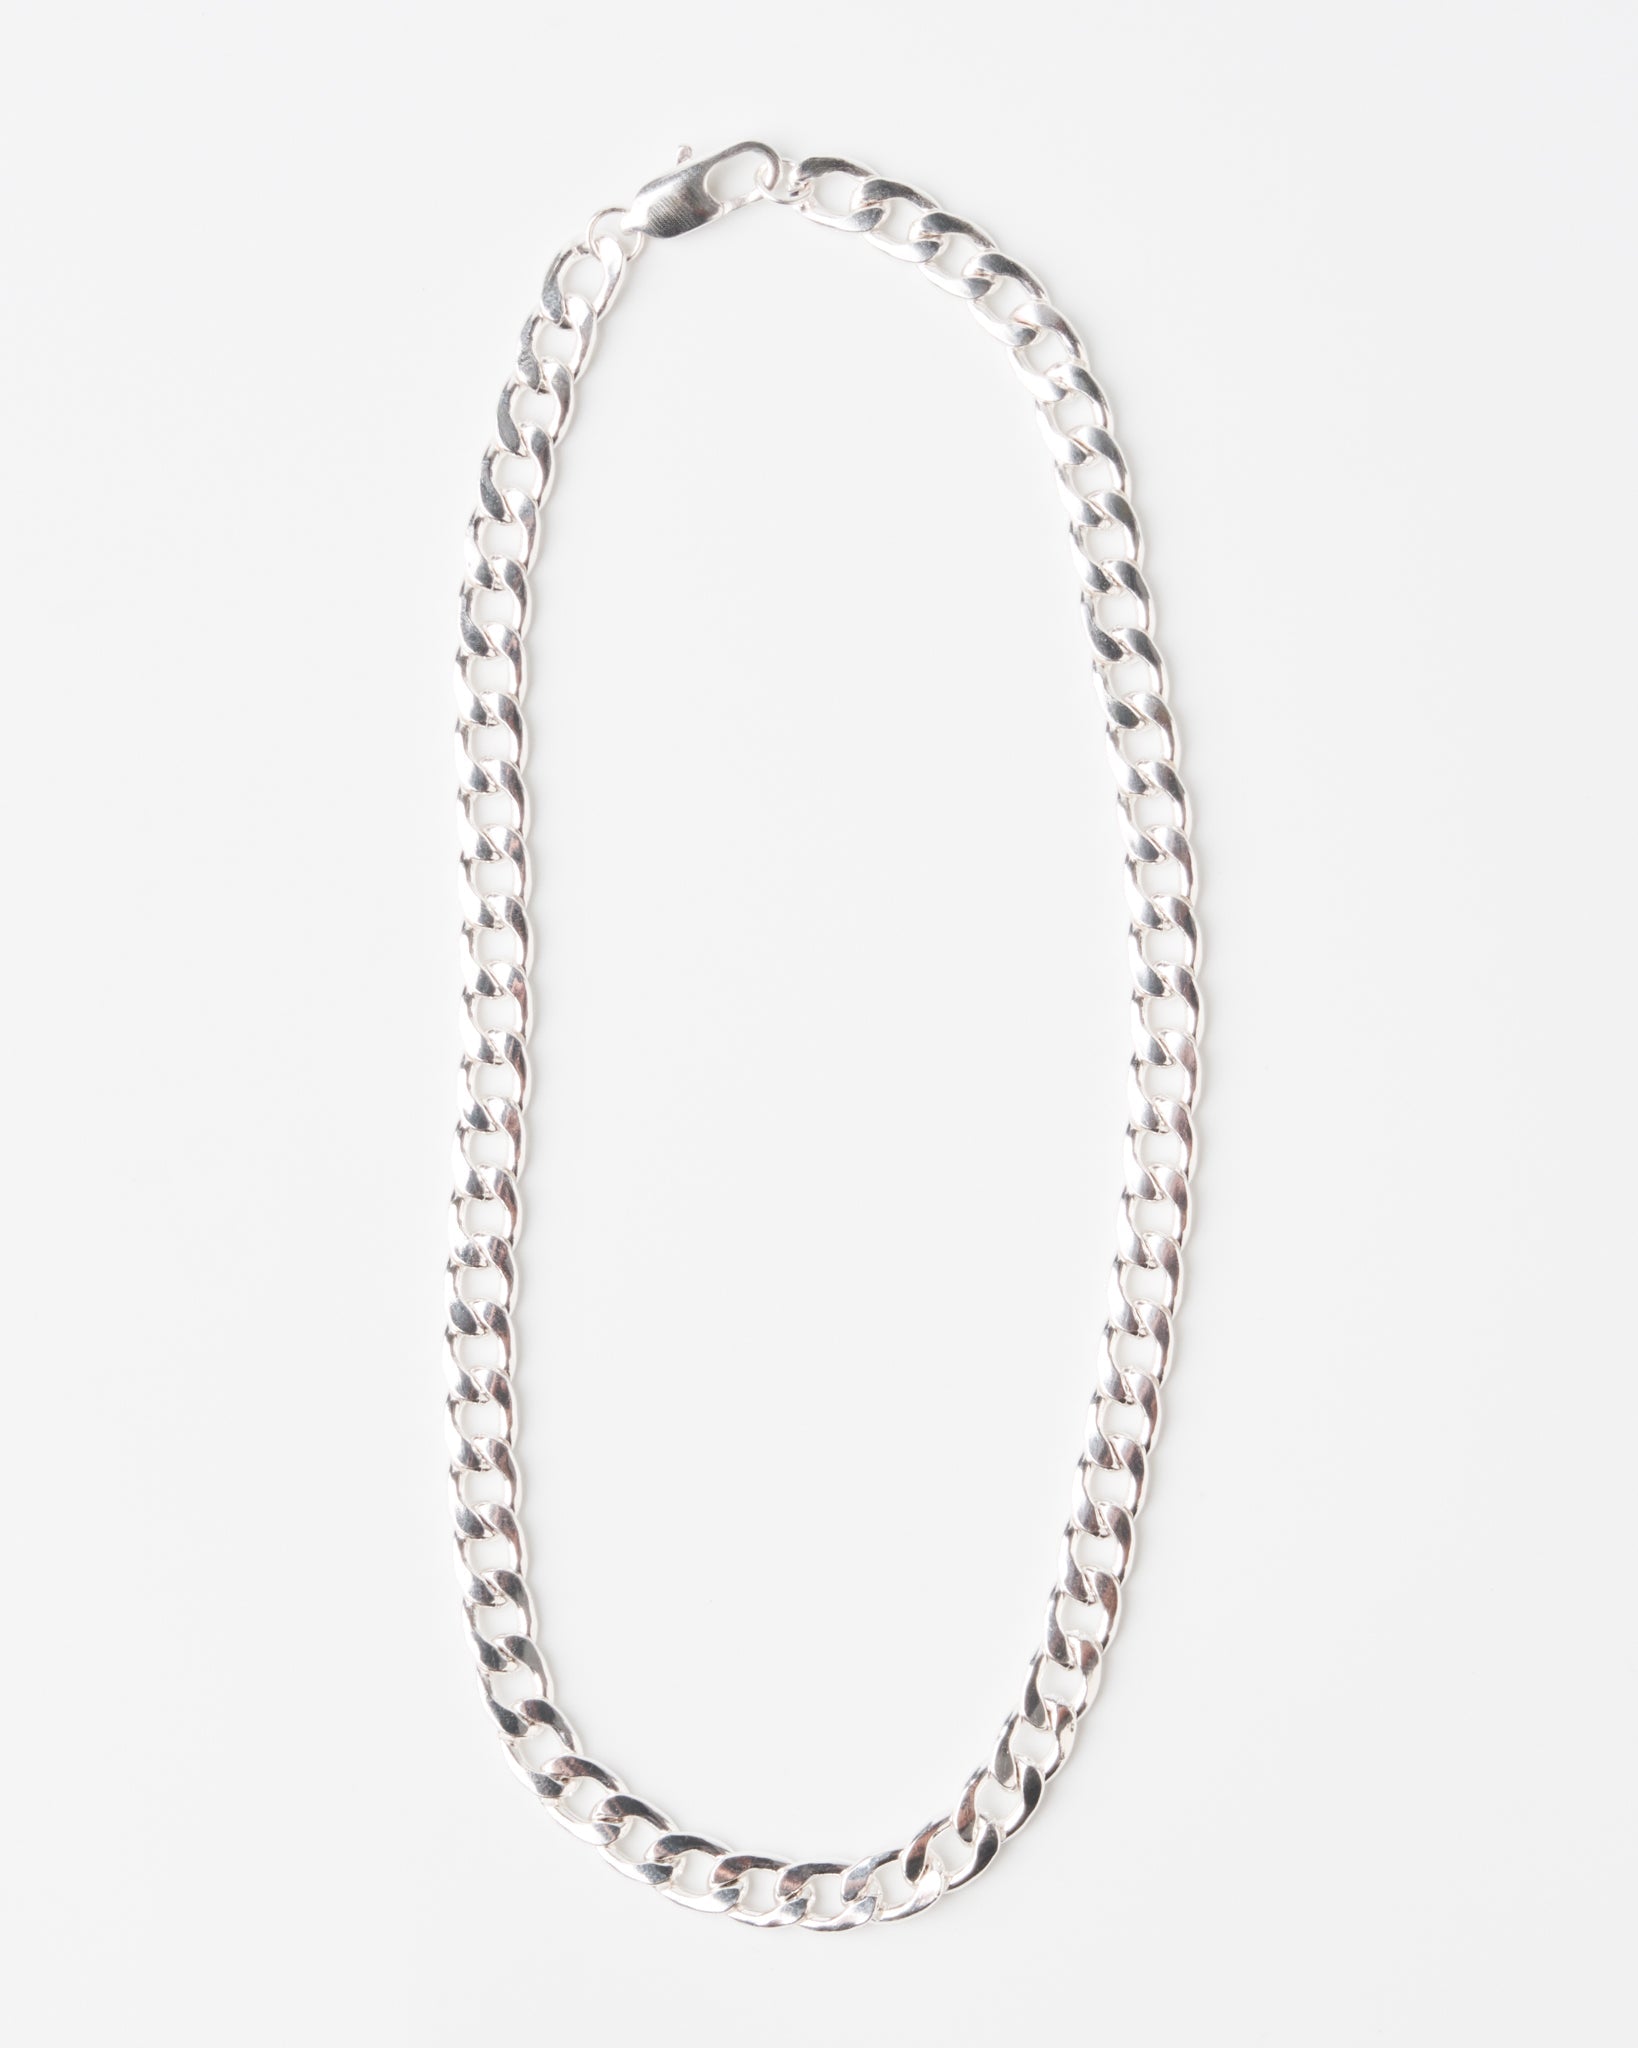 Wale Chain Necklace